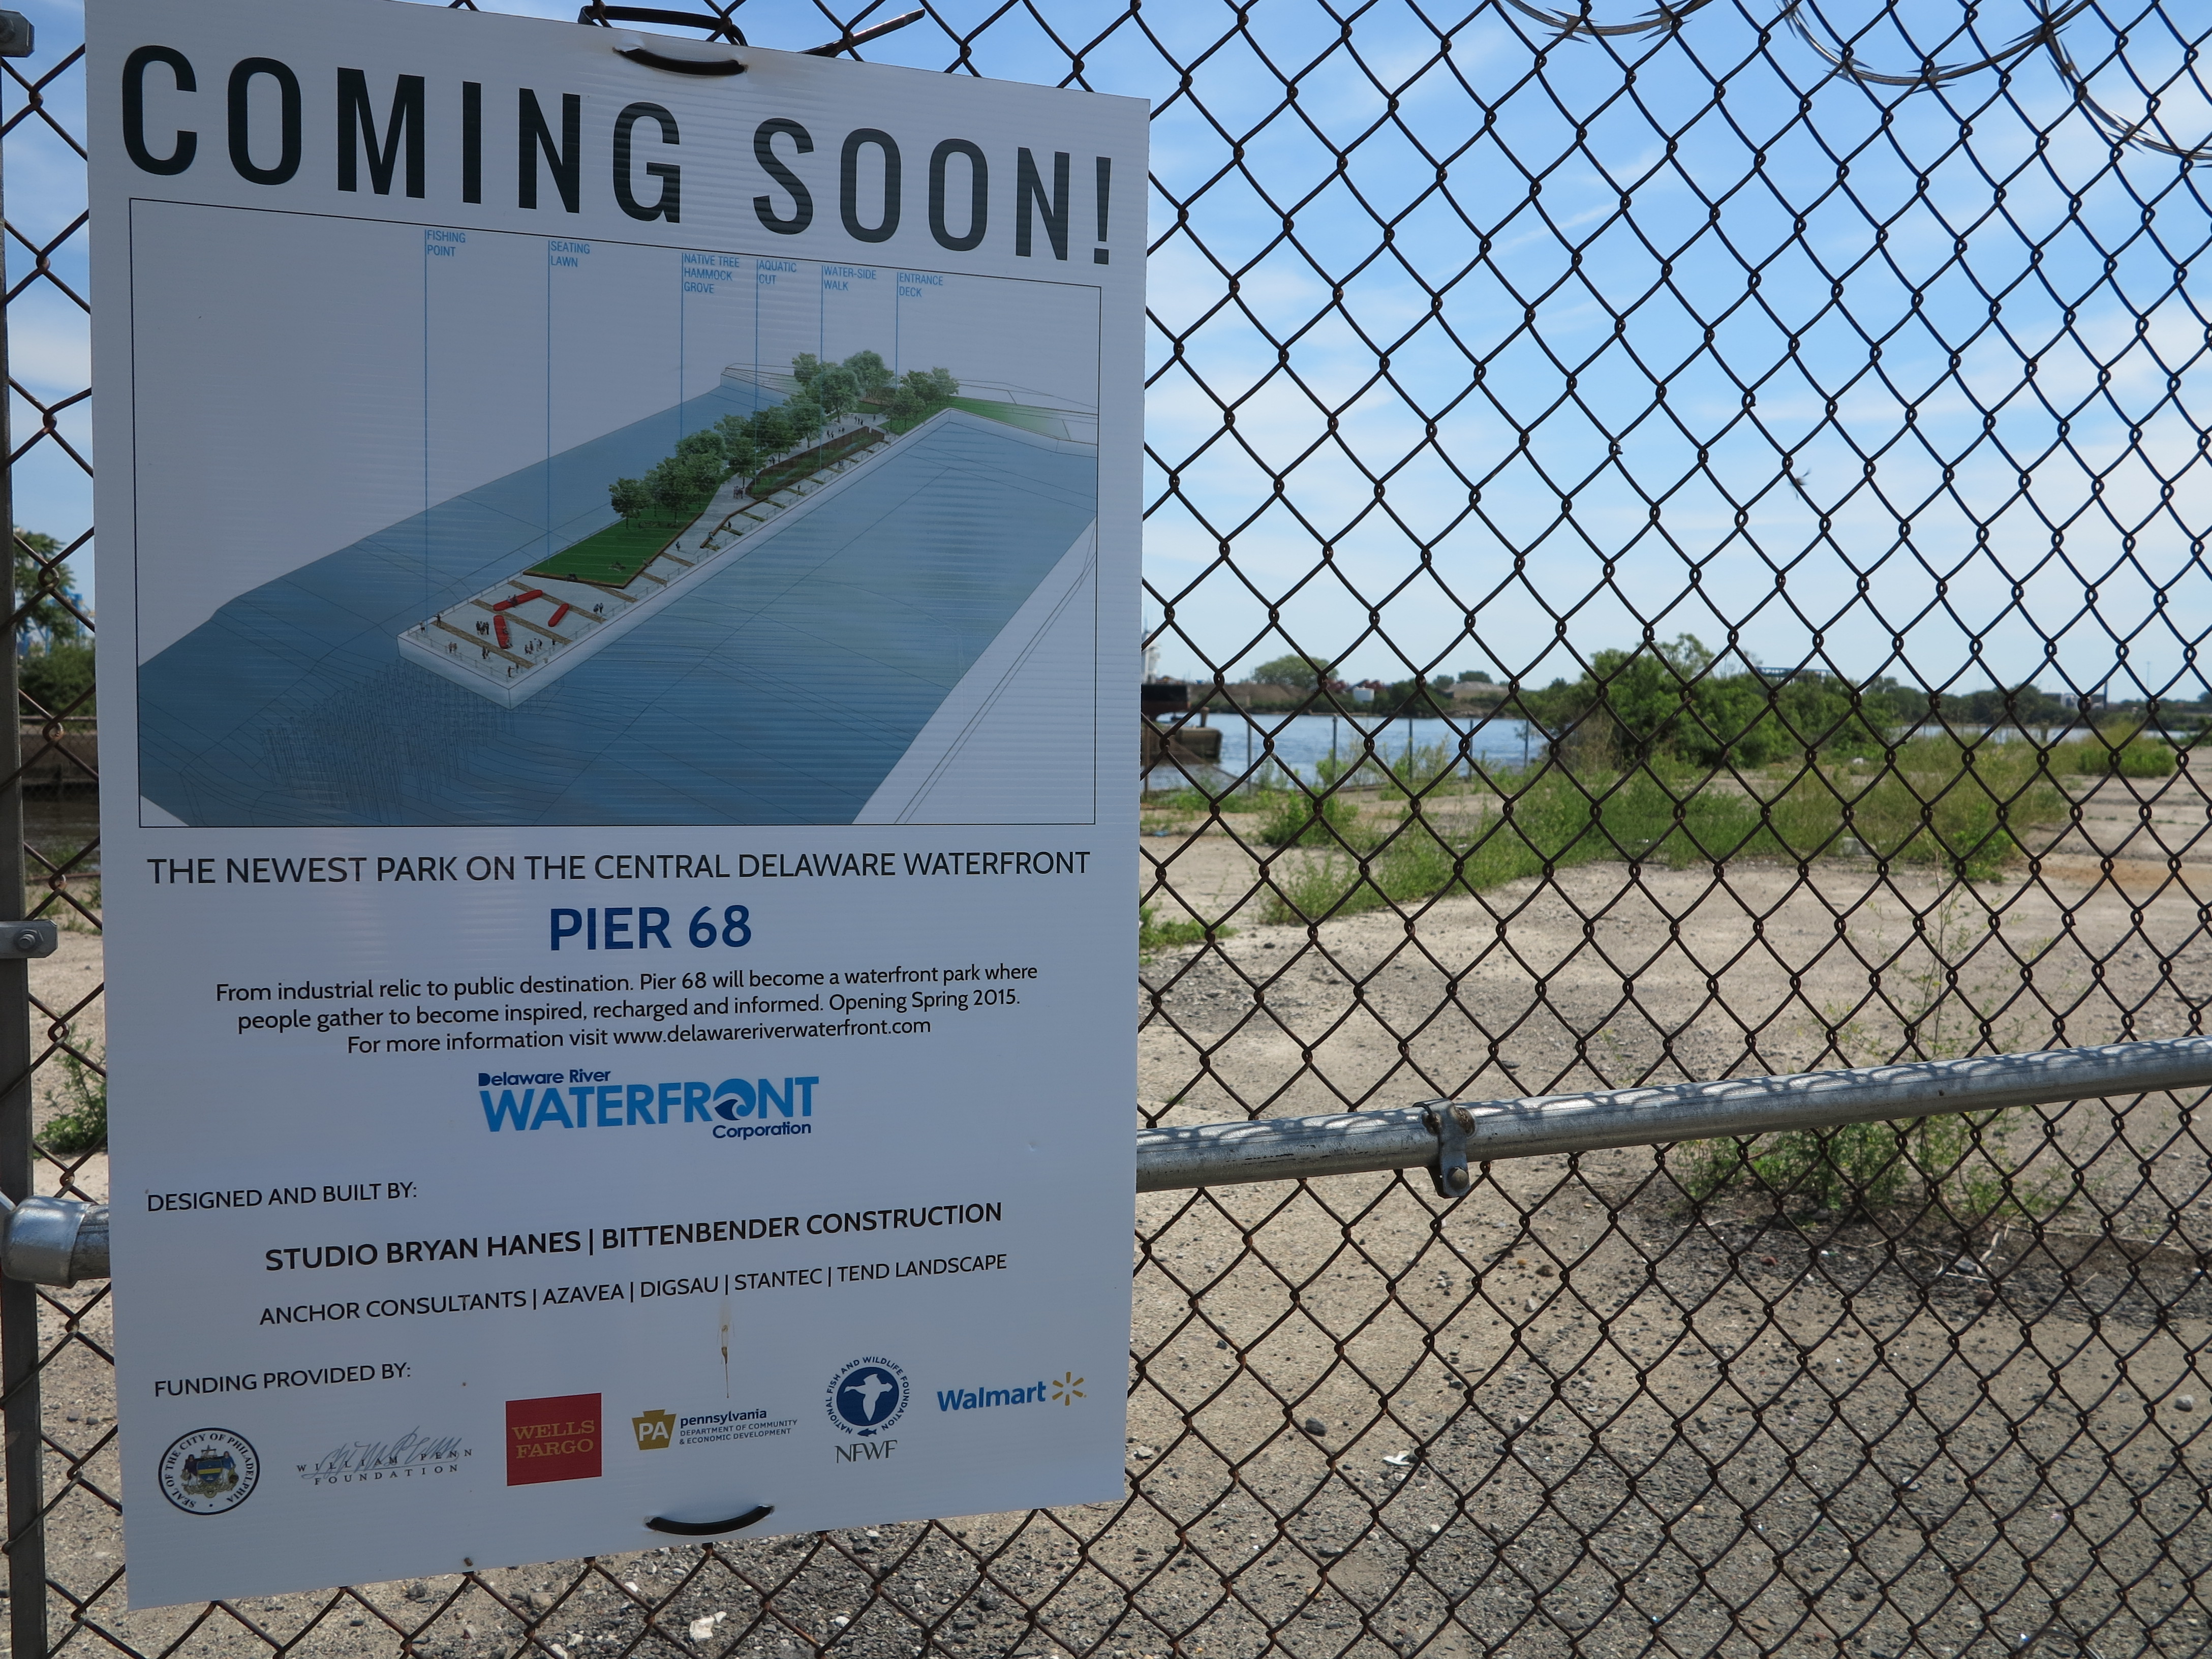 Coming Soon, changes for Pier 68